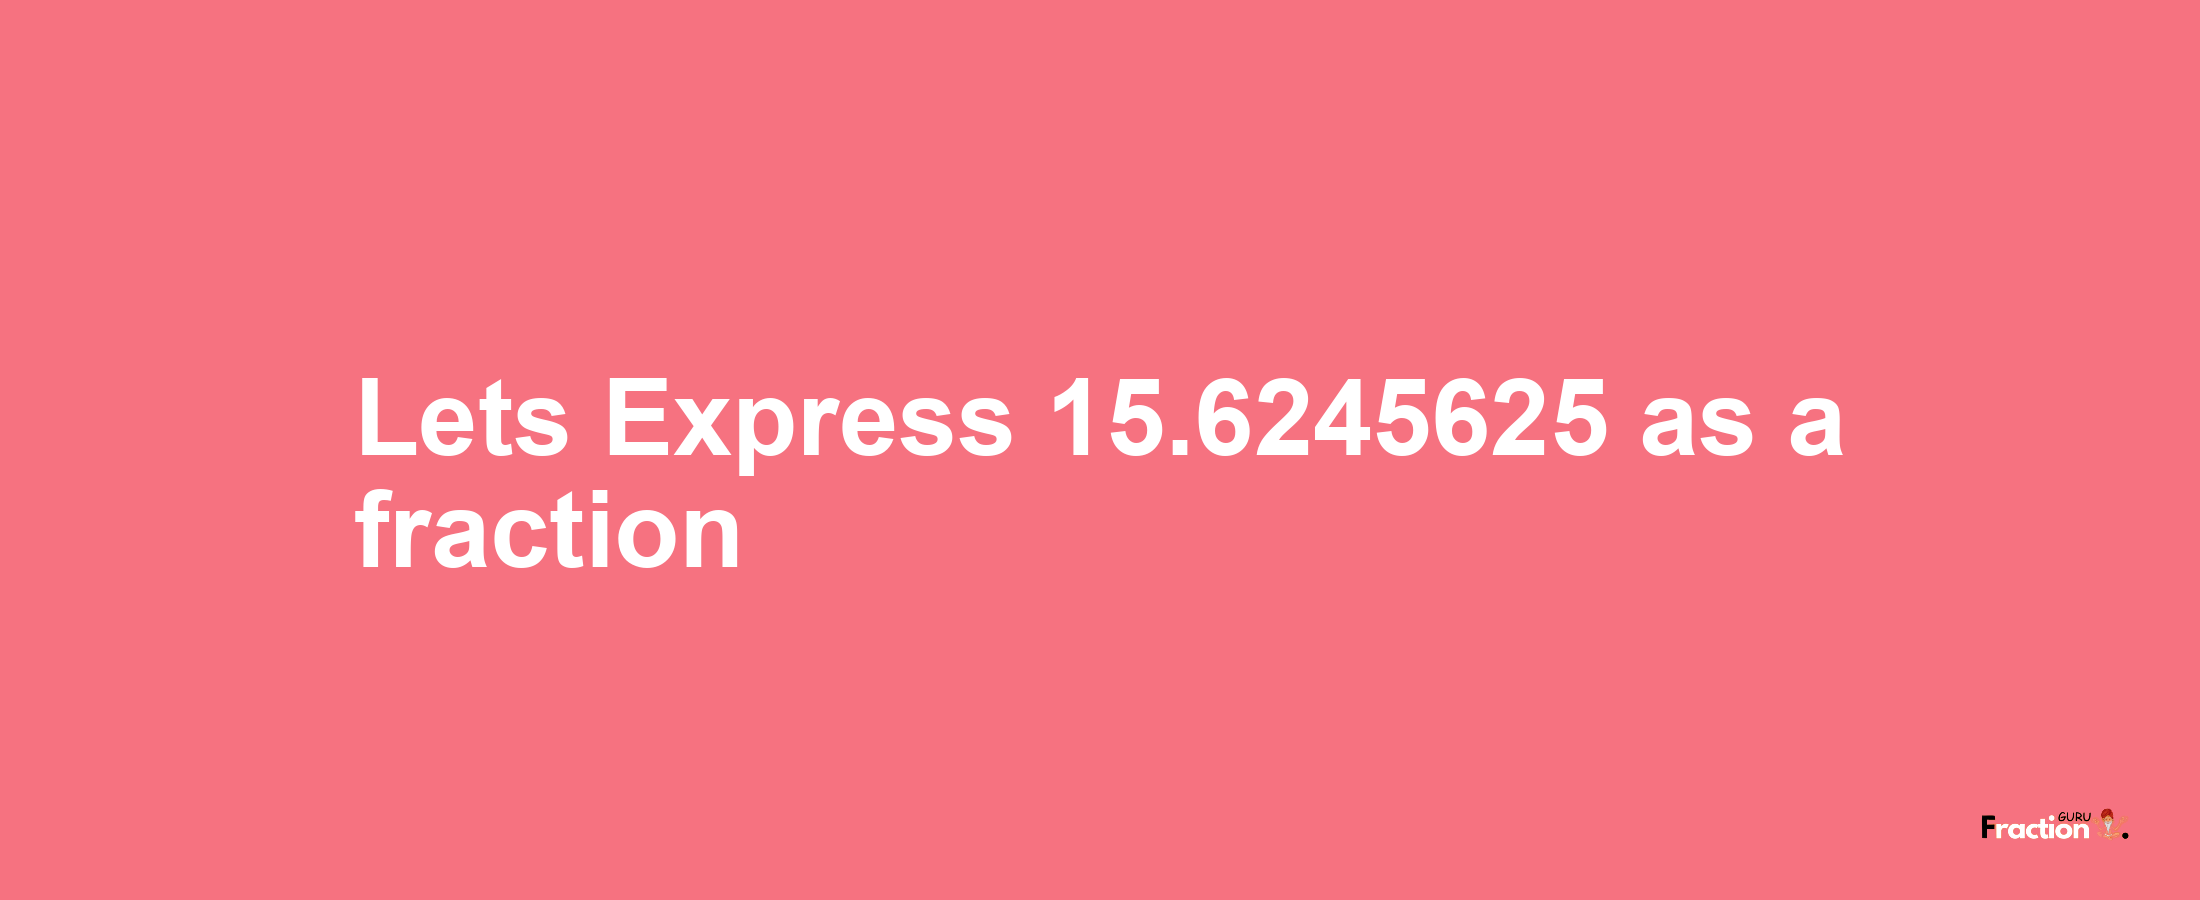 Lets Express 15.6245625 as afraction